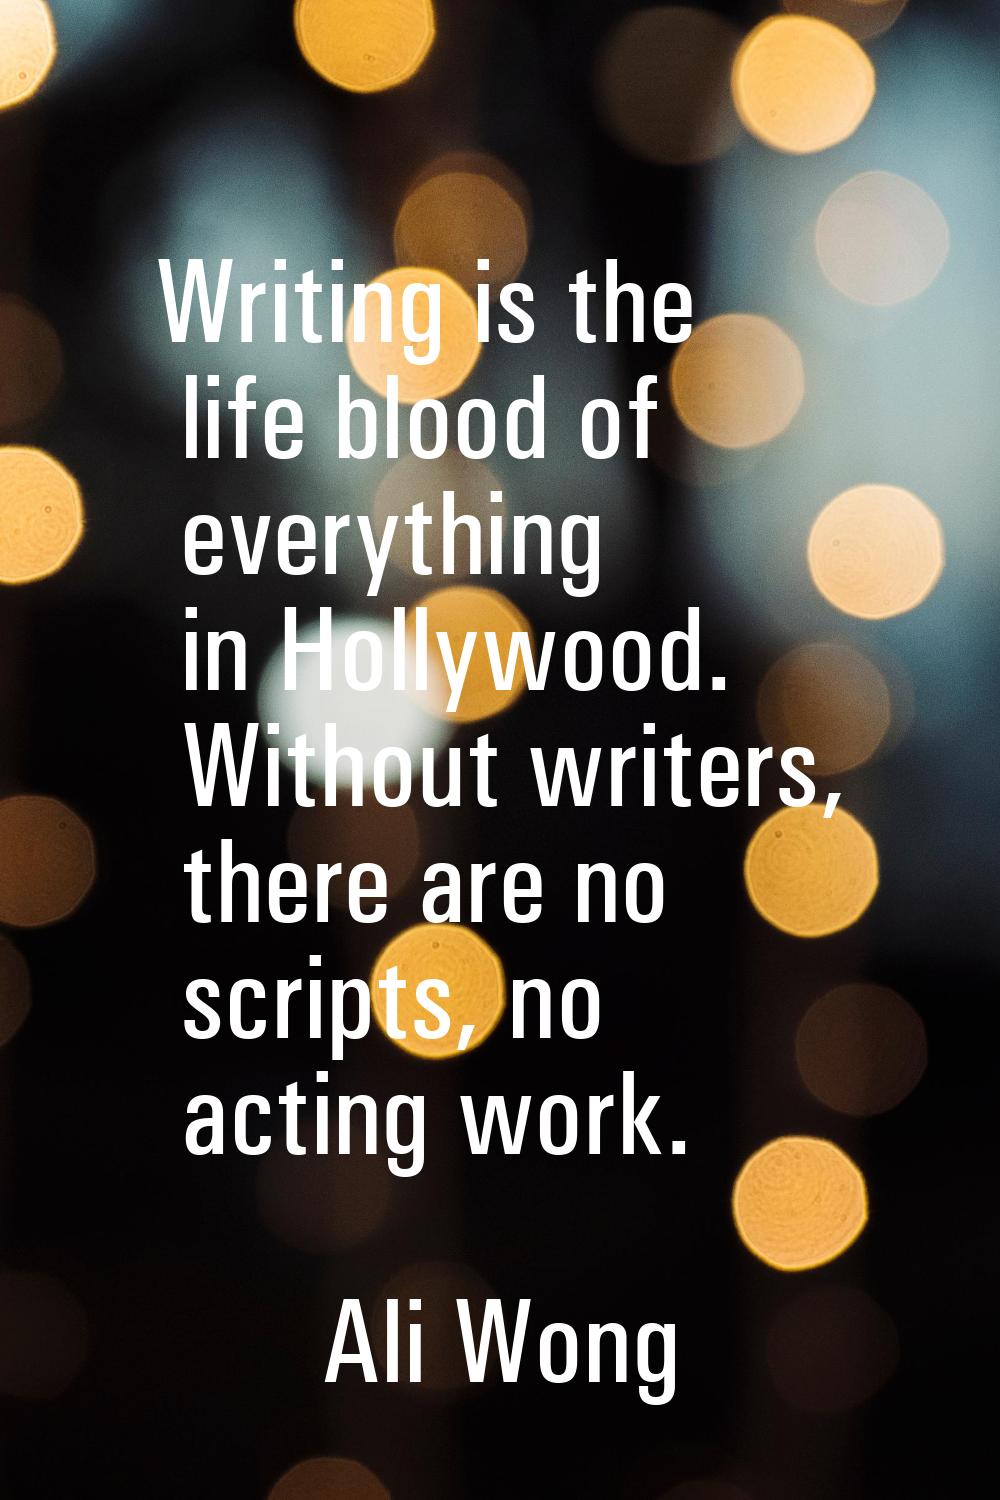 Writing is the life blood of everything in Hollywood. Without writers, there are no scripts, no act